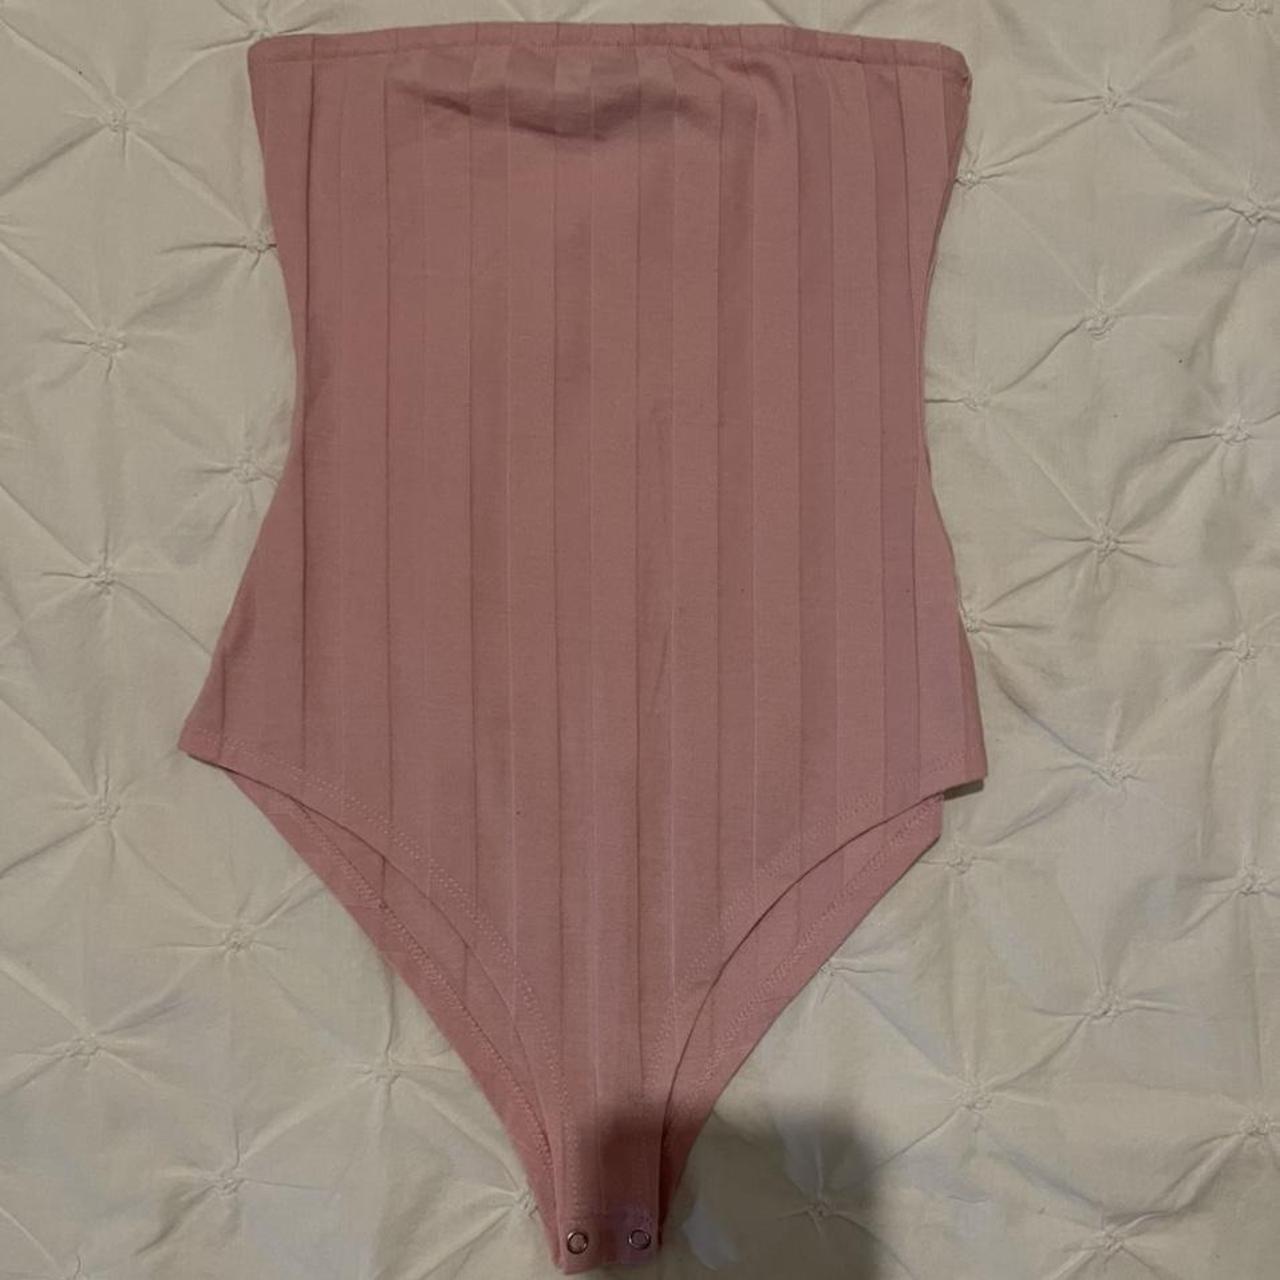 Pink Striped Bodysuit From Select Still In Very Depop 3882